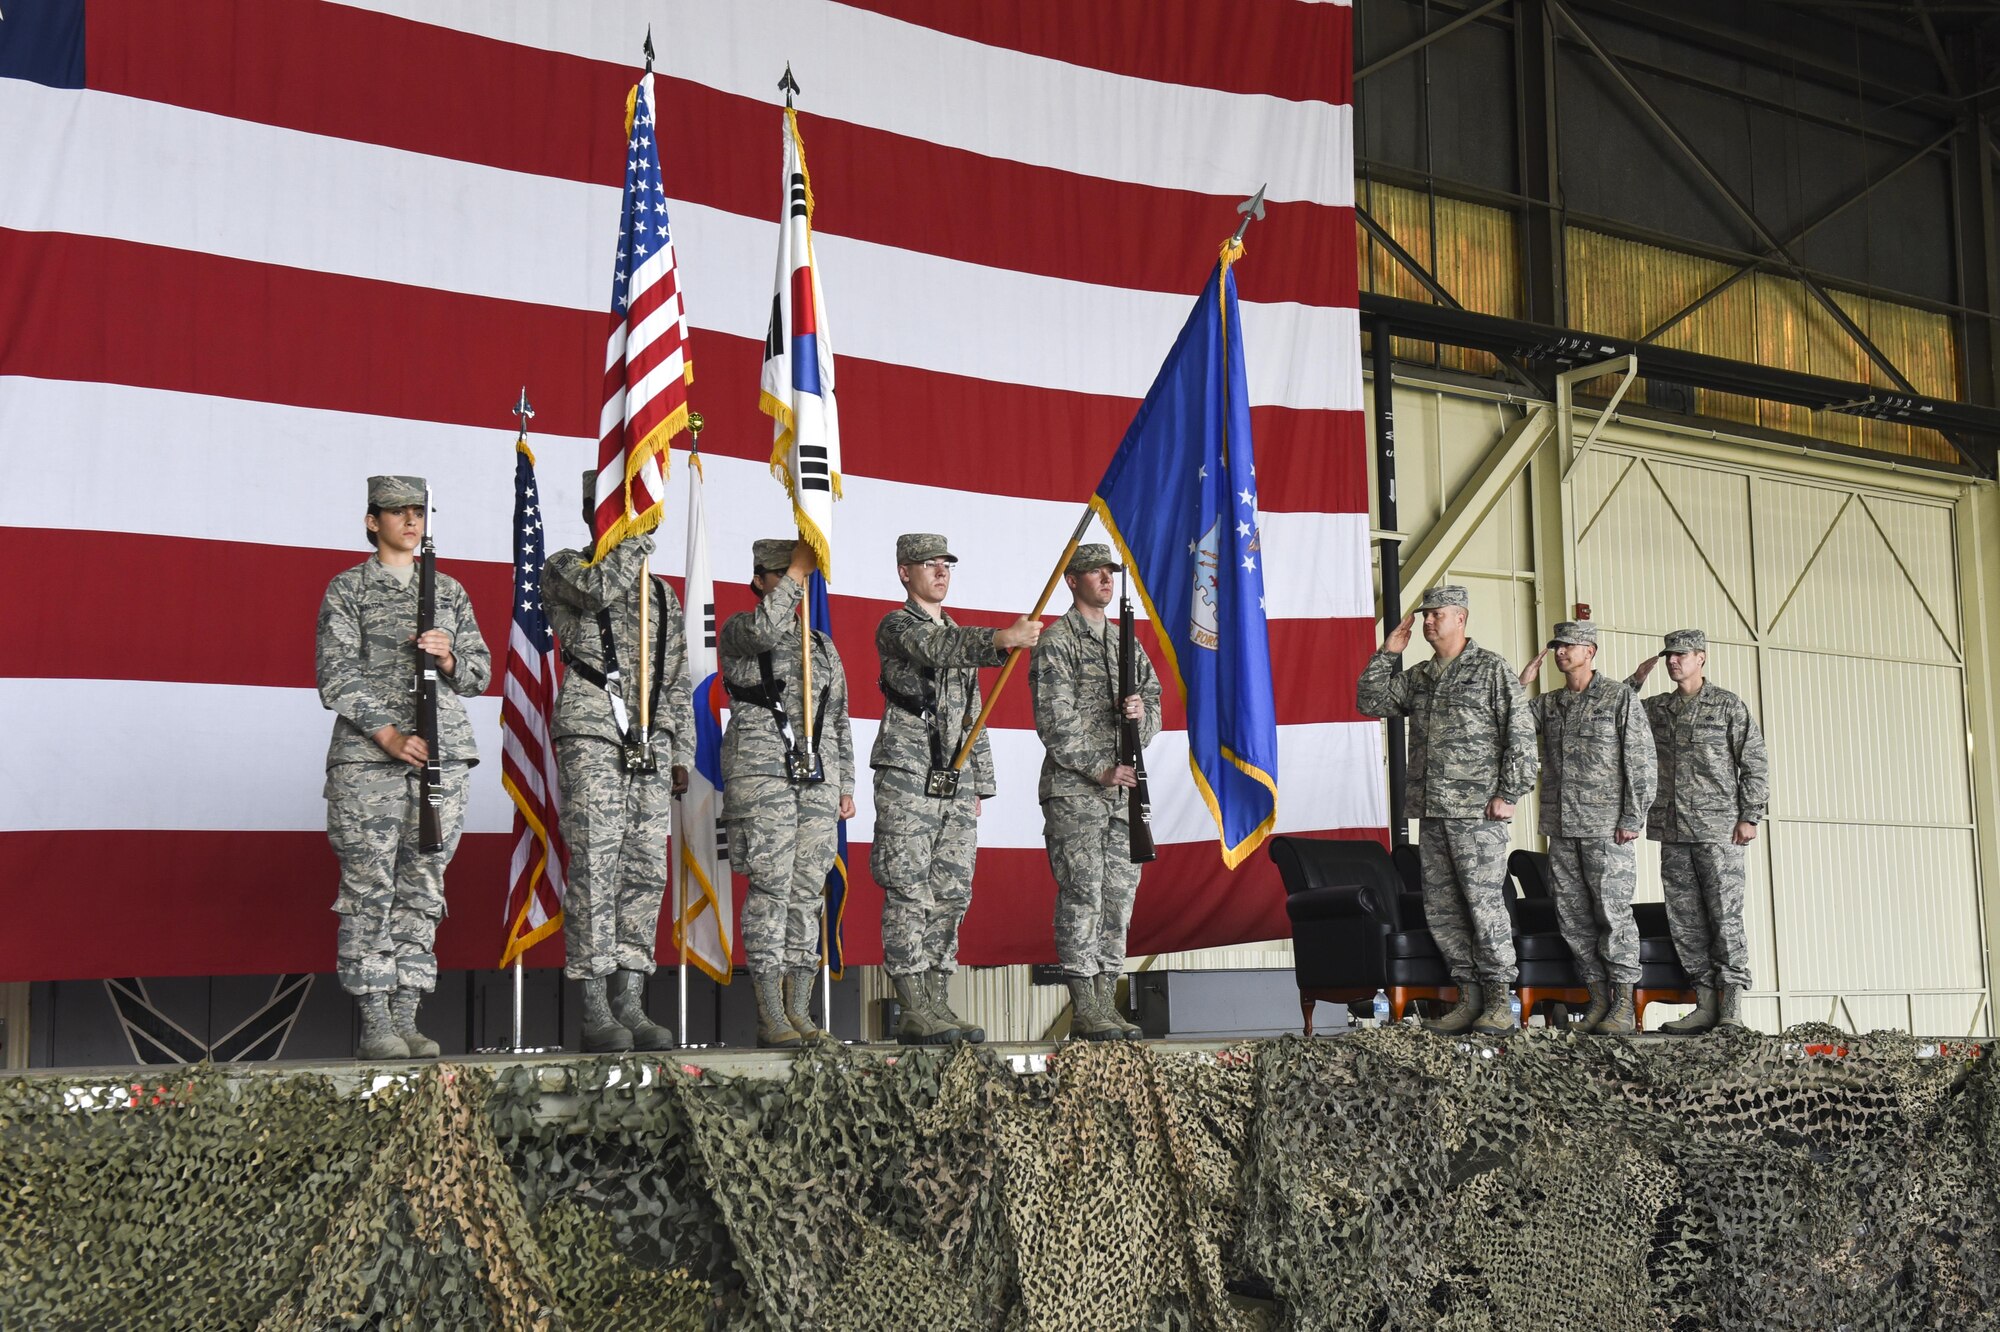 U.S. Air Force Col. David Shoemaker, 8th Fighter Wing commander, Col. Richard McKee, 8th Mission Support Group outgoing commander, and Col. Michael Zuhlsdorf, 8th MSG incoming commander, salute during a change of command ceremony at Kunsan Air Base, Republic of Korea, June 8, 2017. During the ceremony Col. Richard McKee relinquished command of the 8th MSG to Col. Michael Zuhlsdorf. (U.S. Air Force photo by Senior Airman Michael Hunsaker/Released)